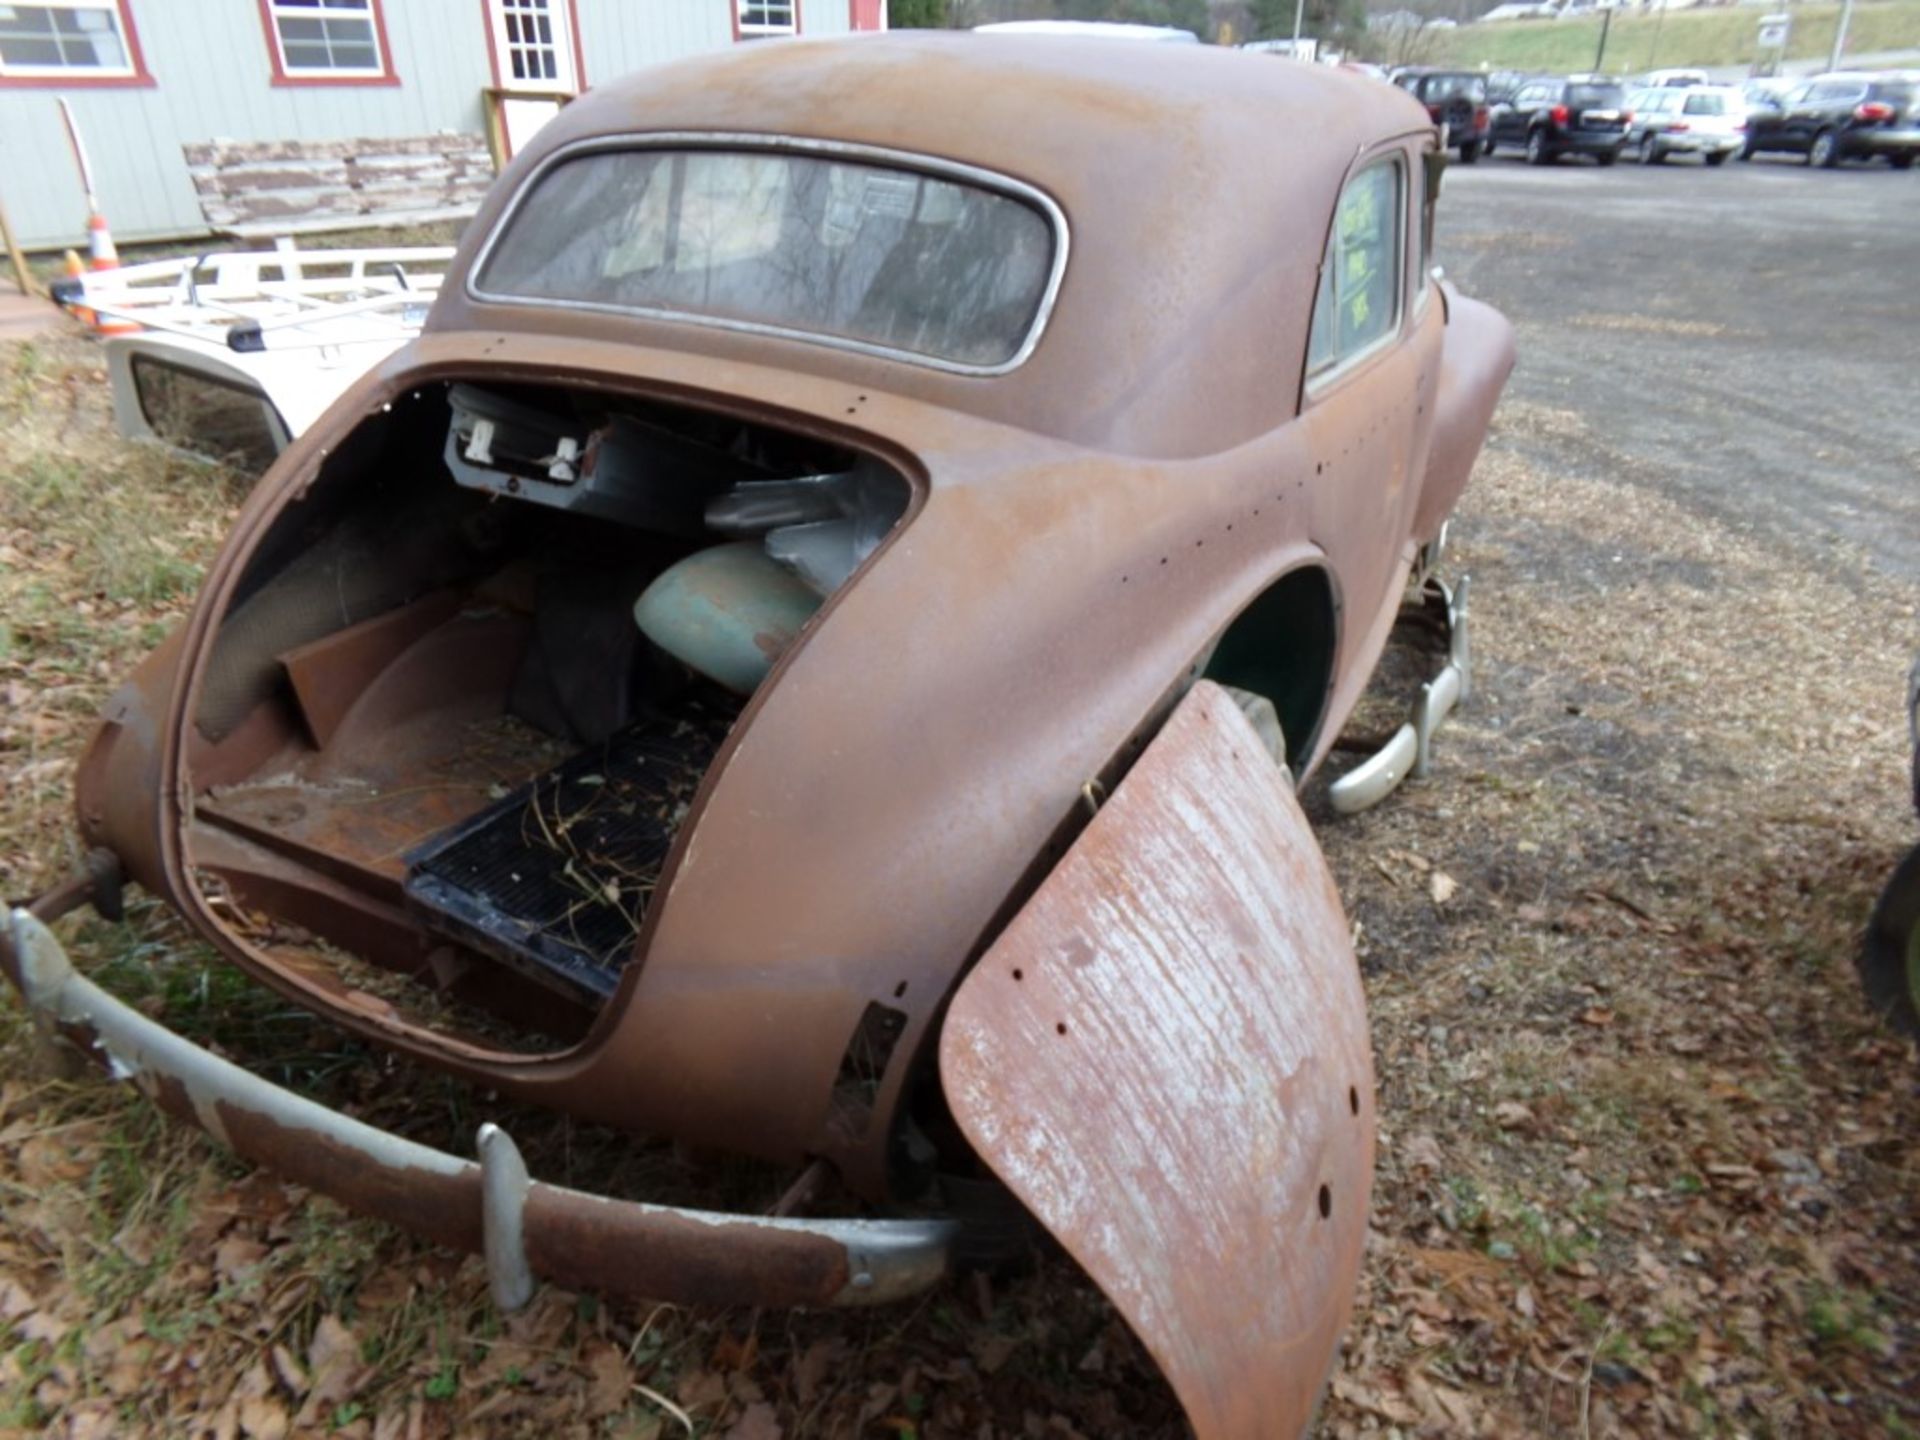 1940 Buick, Green, 88,325 Mi, Vin# 13821285 - HAS TRANSFERABLE REGISTRATION / OPEN TO ALL BUYERS - Image 4 of 5